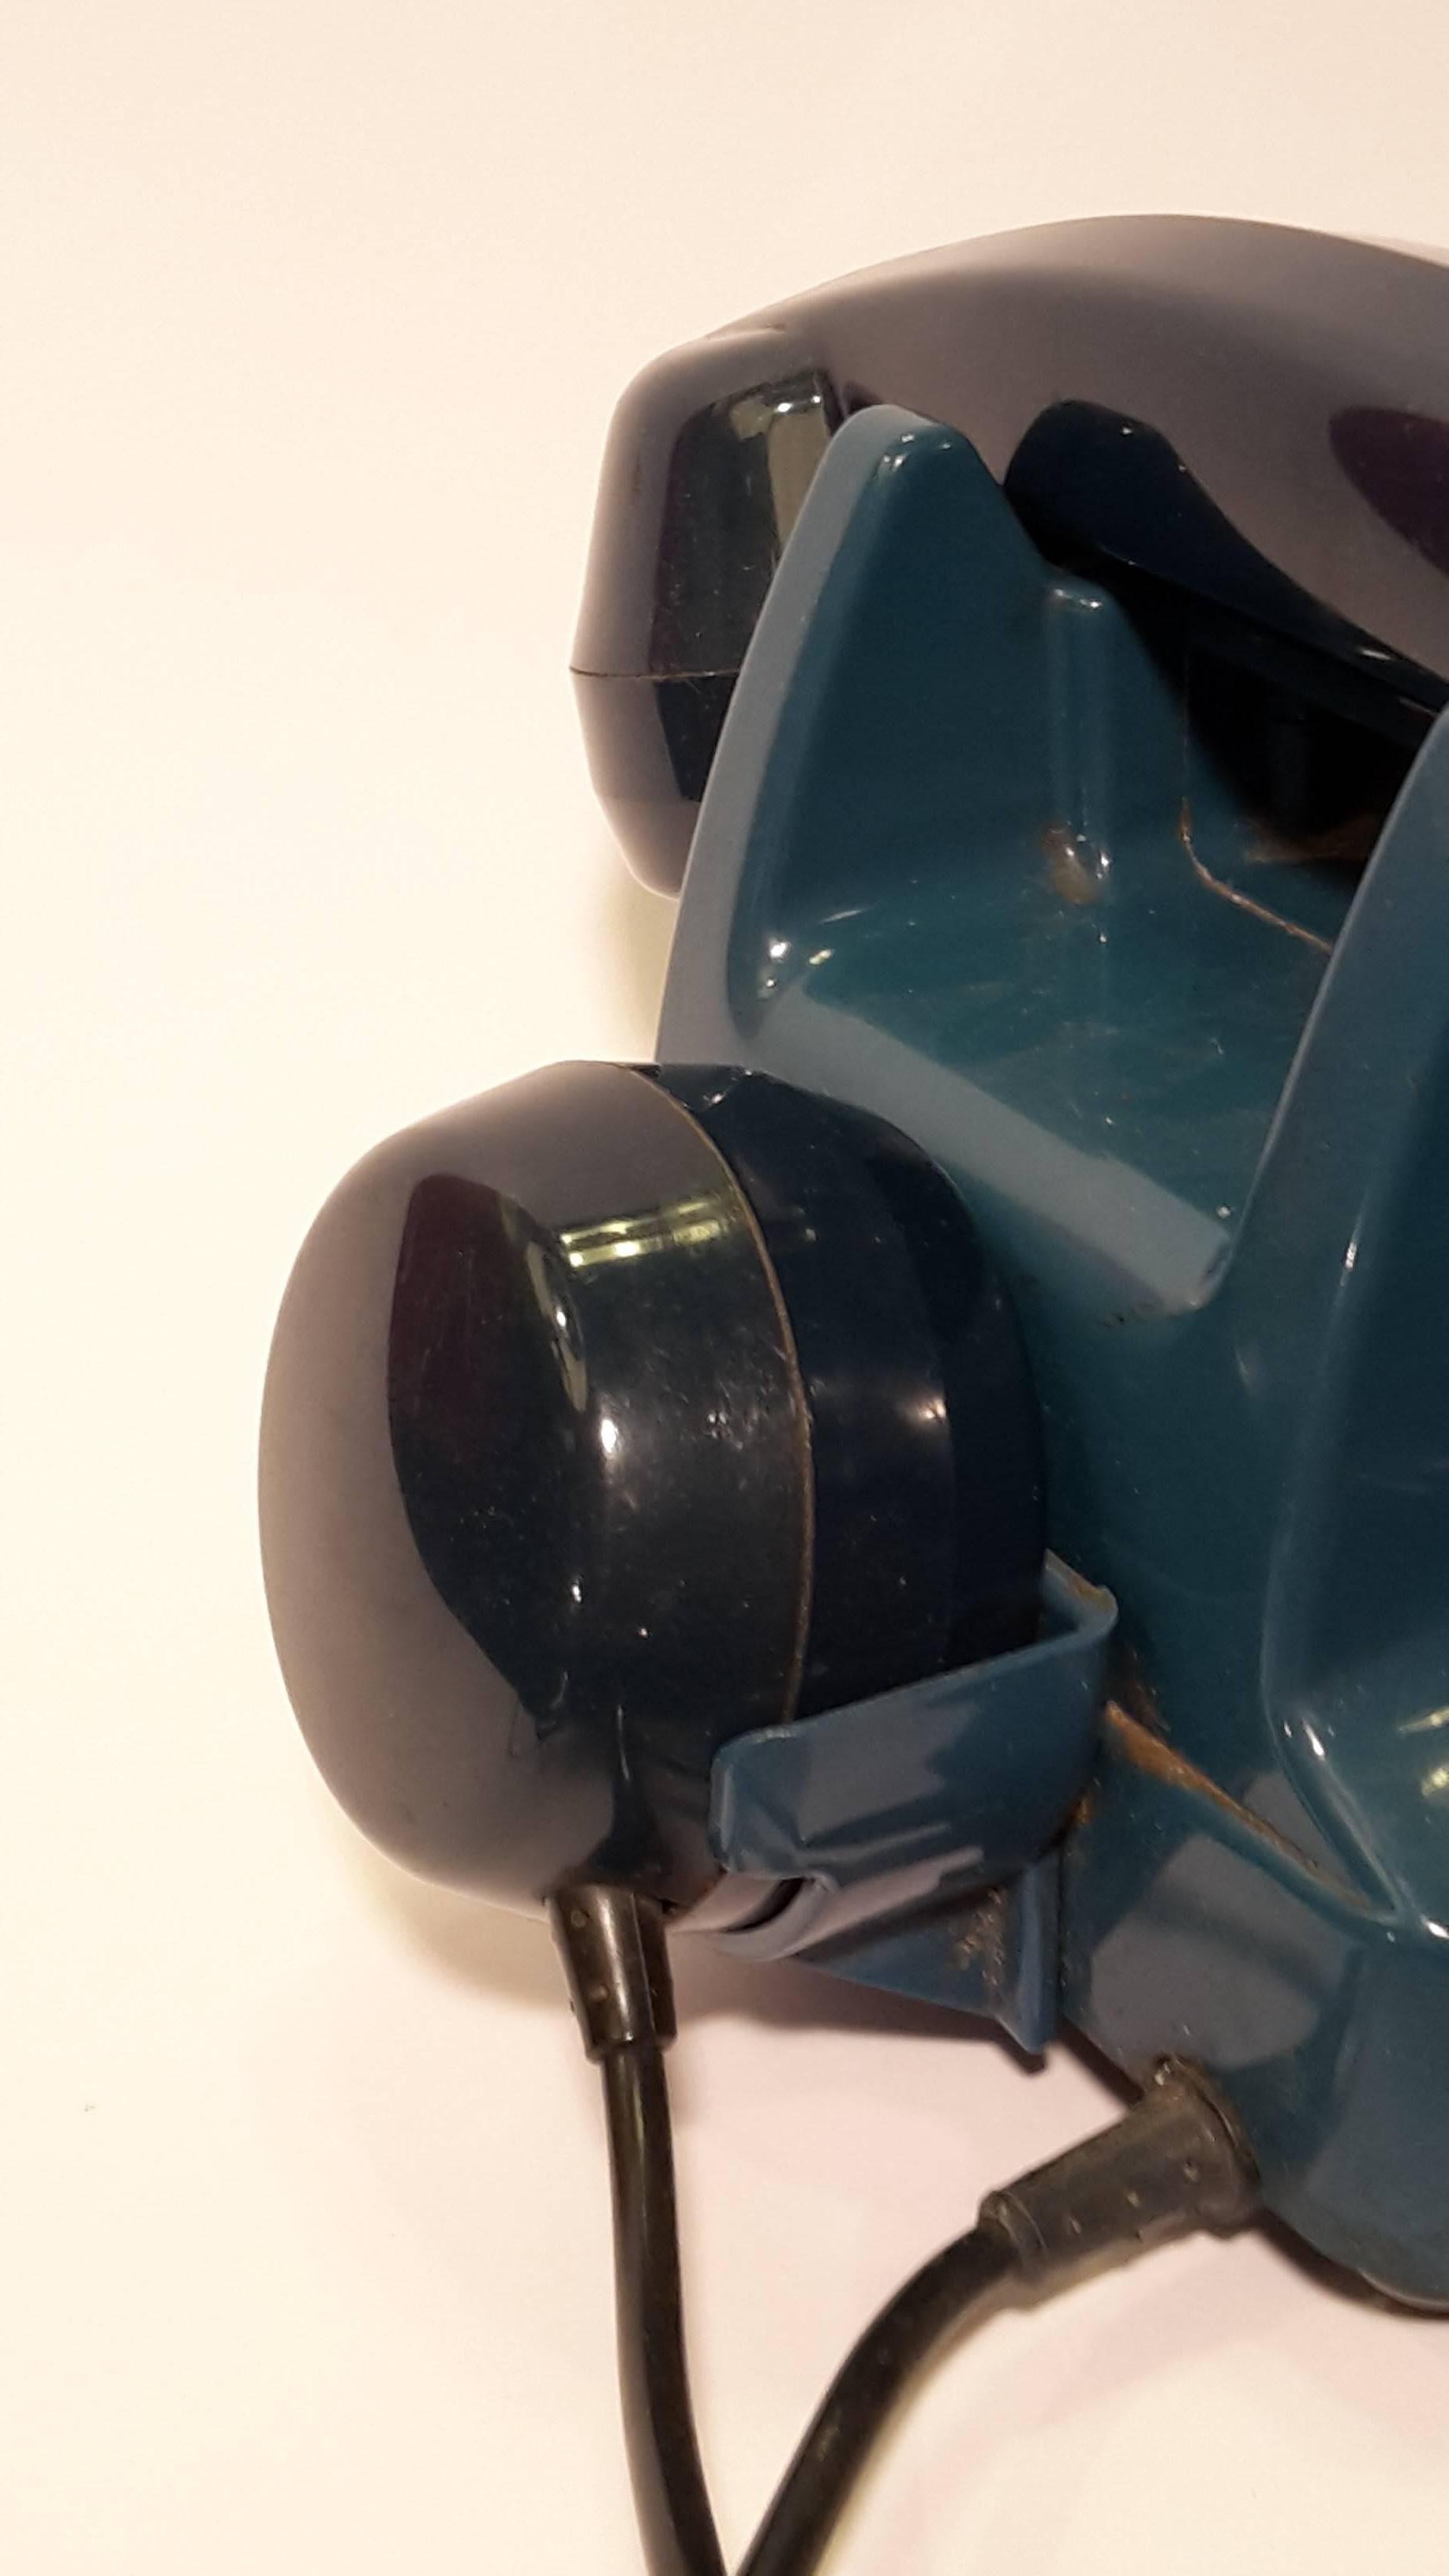 French, can be placed between the years 1960s and 1970s, in blue bakelite. 
Rear headset to listen to the conversation to another person. 
Functioning.